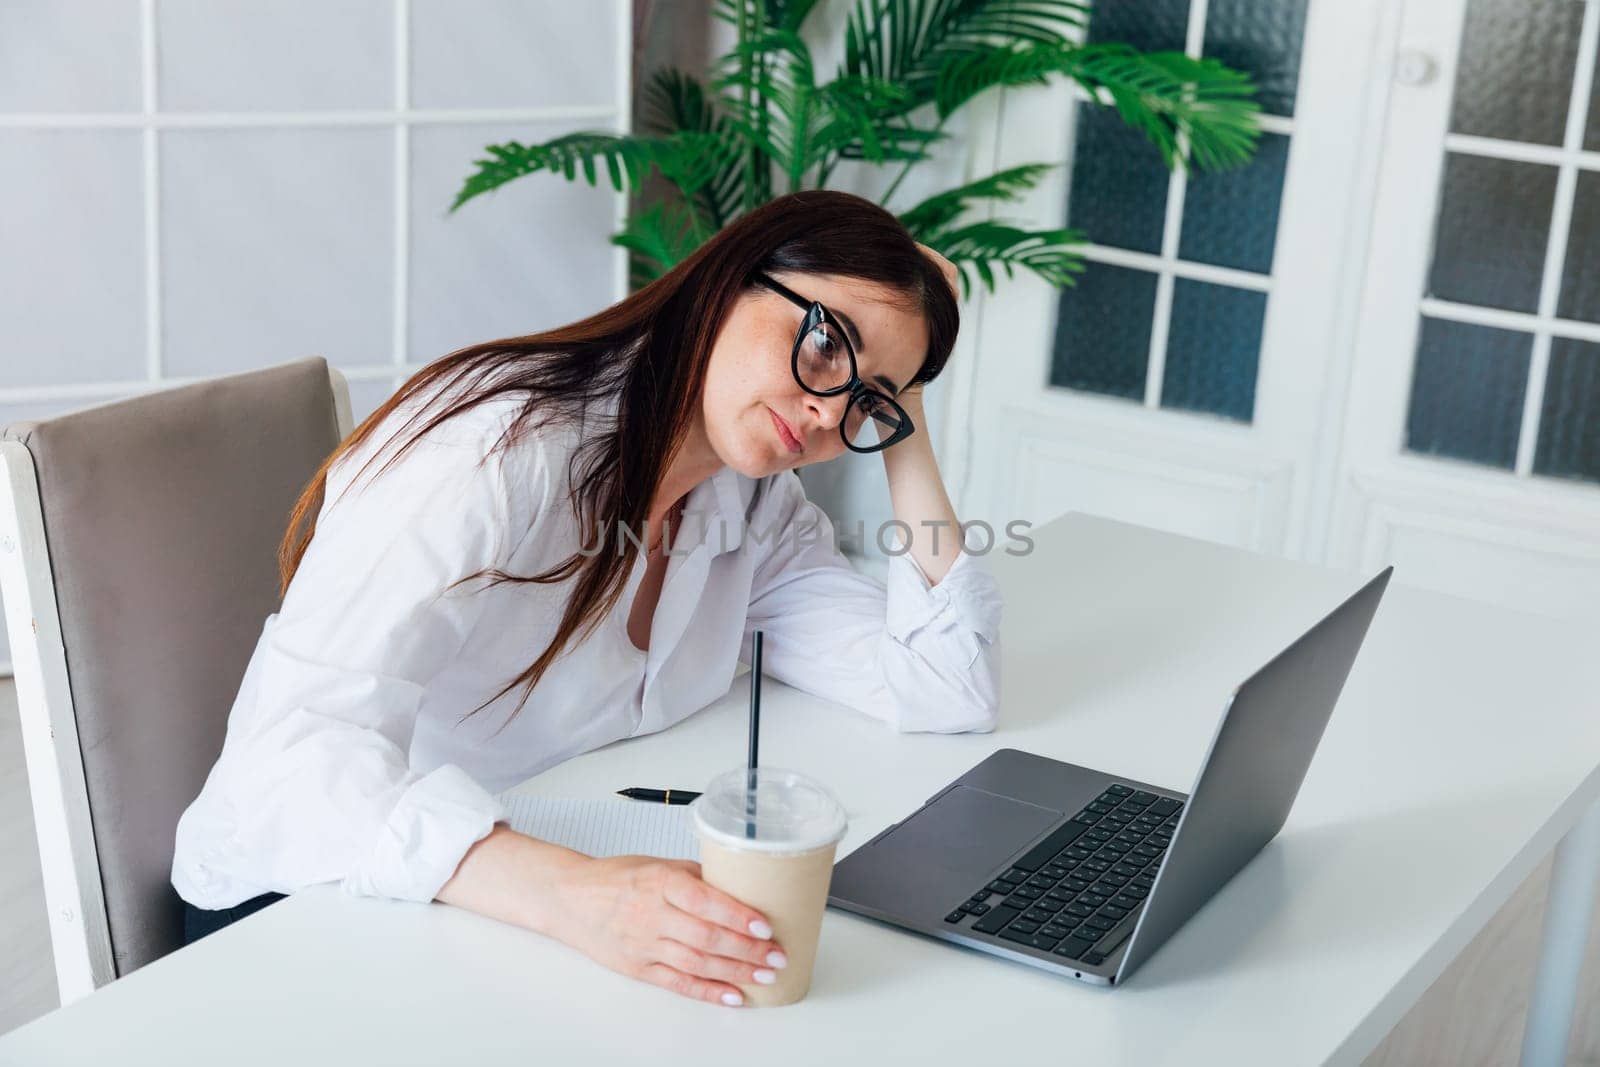 woman tired of working on laptop in office by Simakov